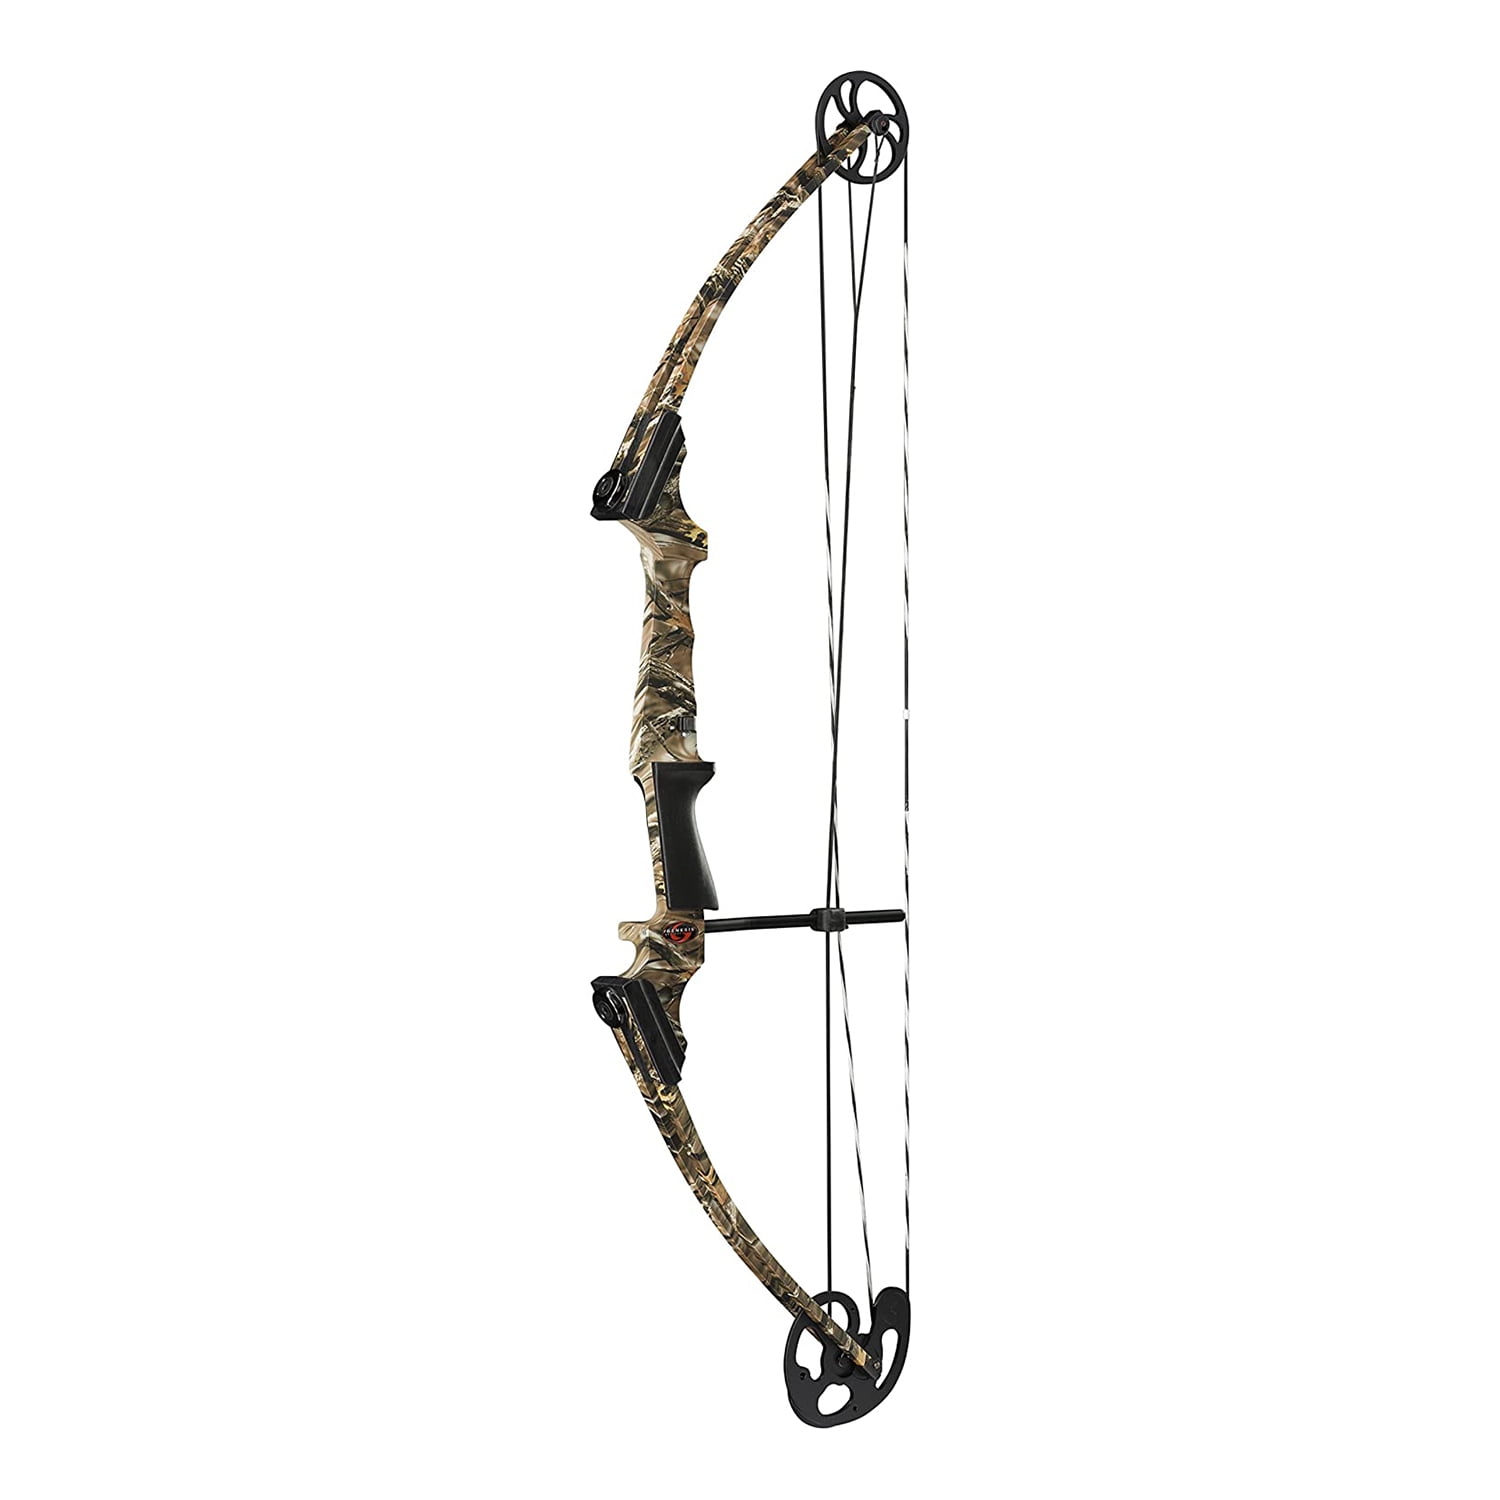 B-50 CAMO BOW STRING SAMICK 62" RECURVE Replacement Bowstring For 30-50 lb bow 